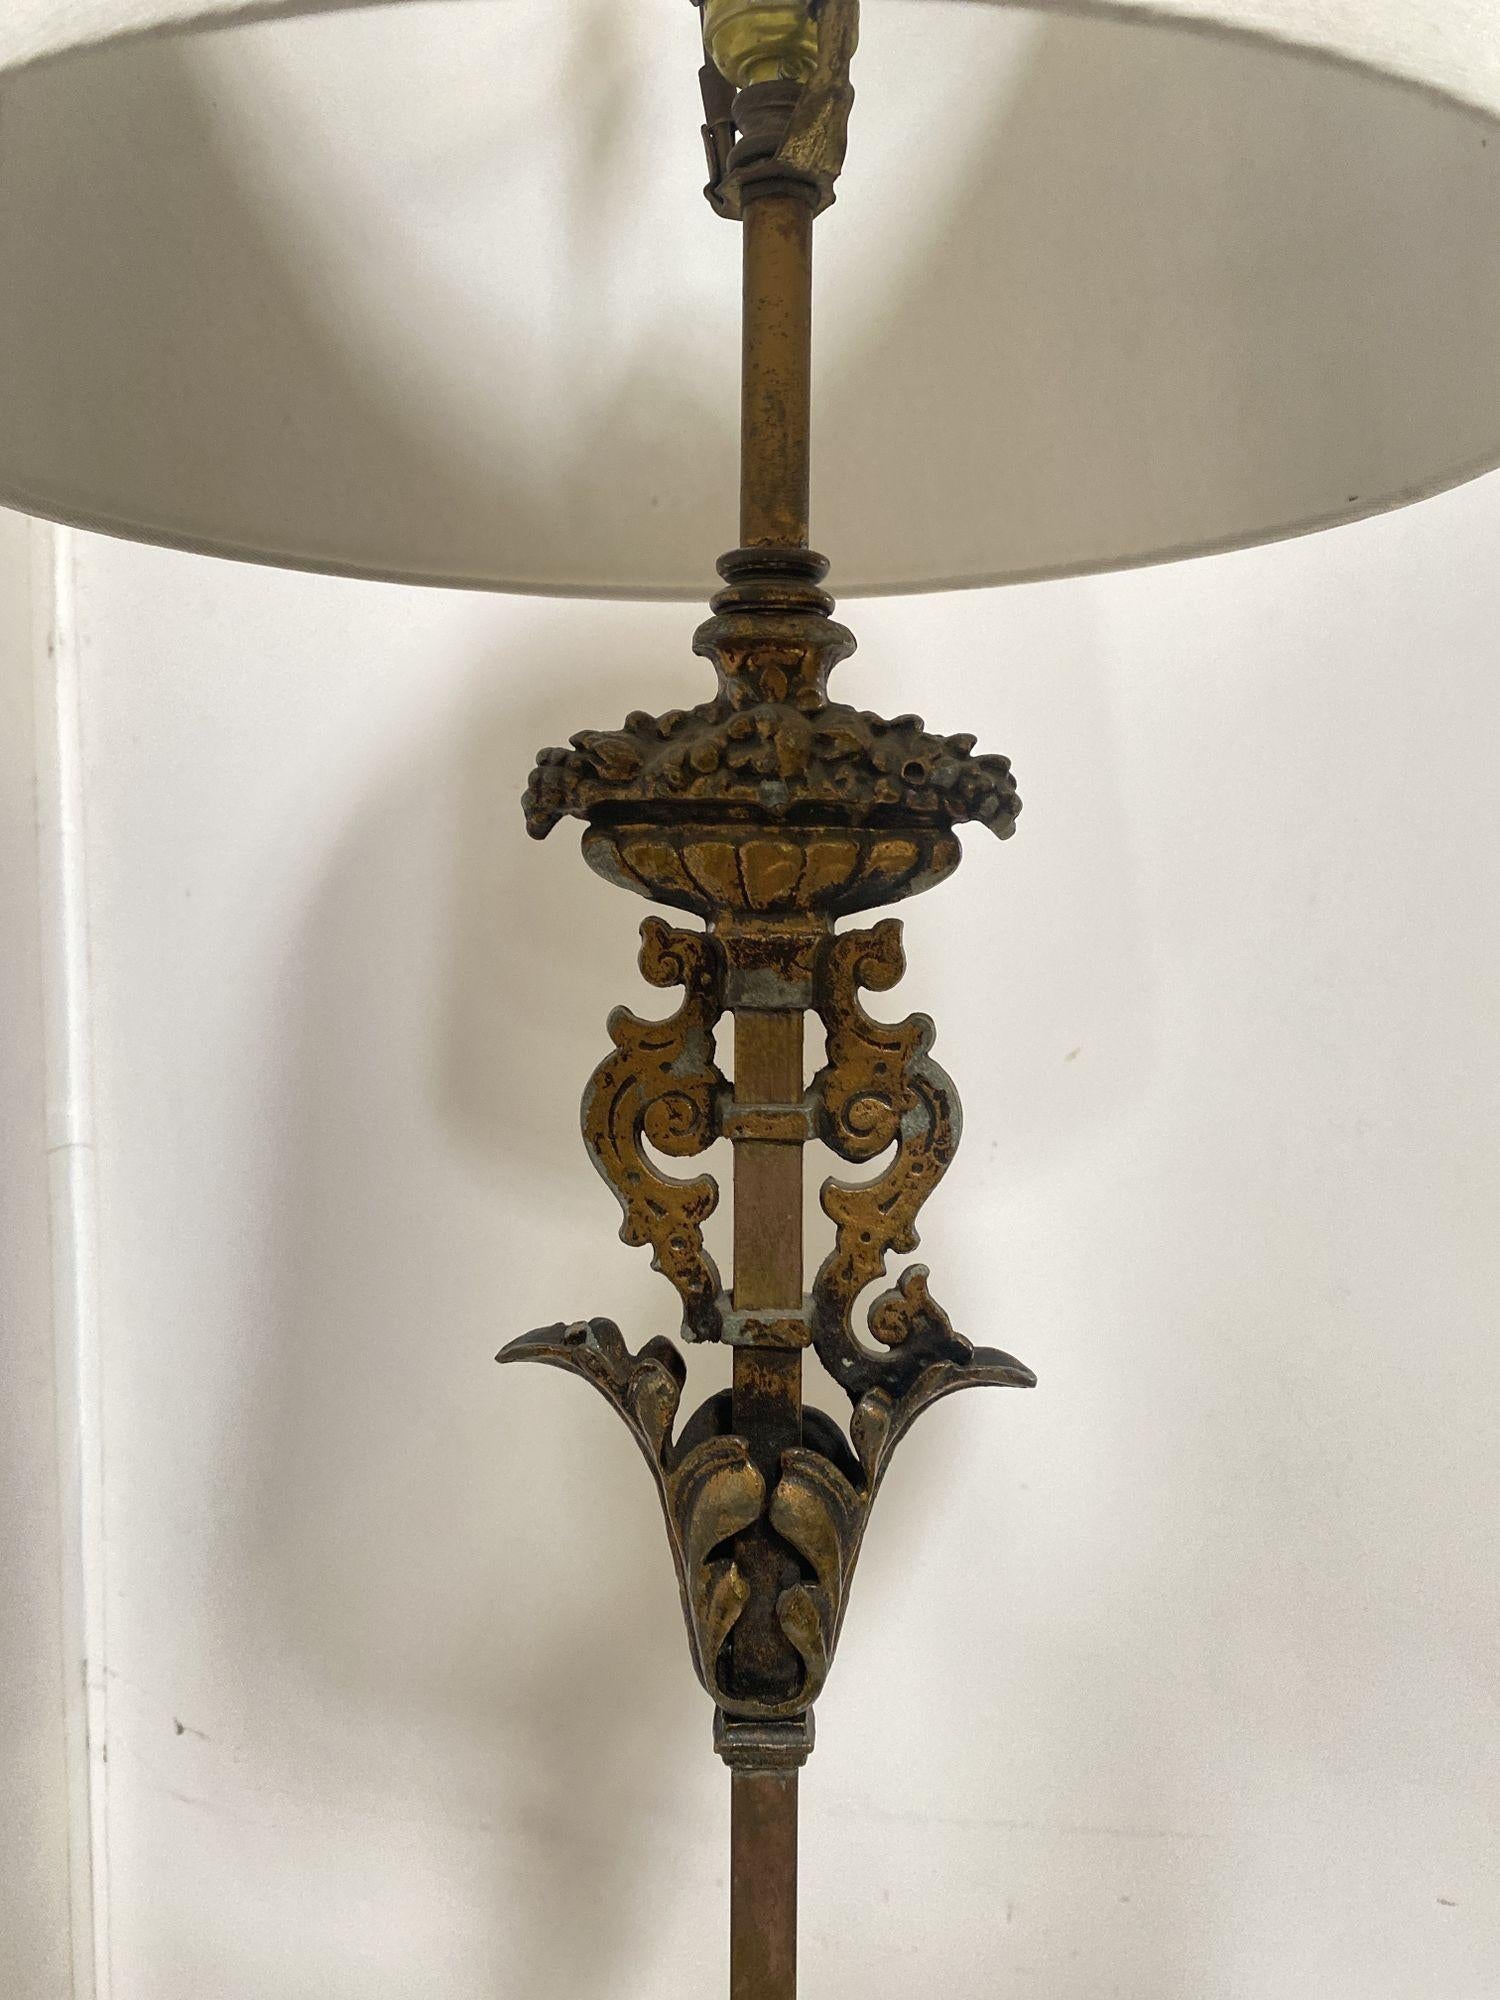 Hollywood Regency Cast Iron Torchiere Floor Lamp by Rembrandt In Excellent Condition For Sale In Van Nuys, CA